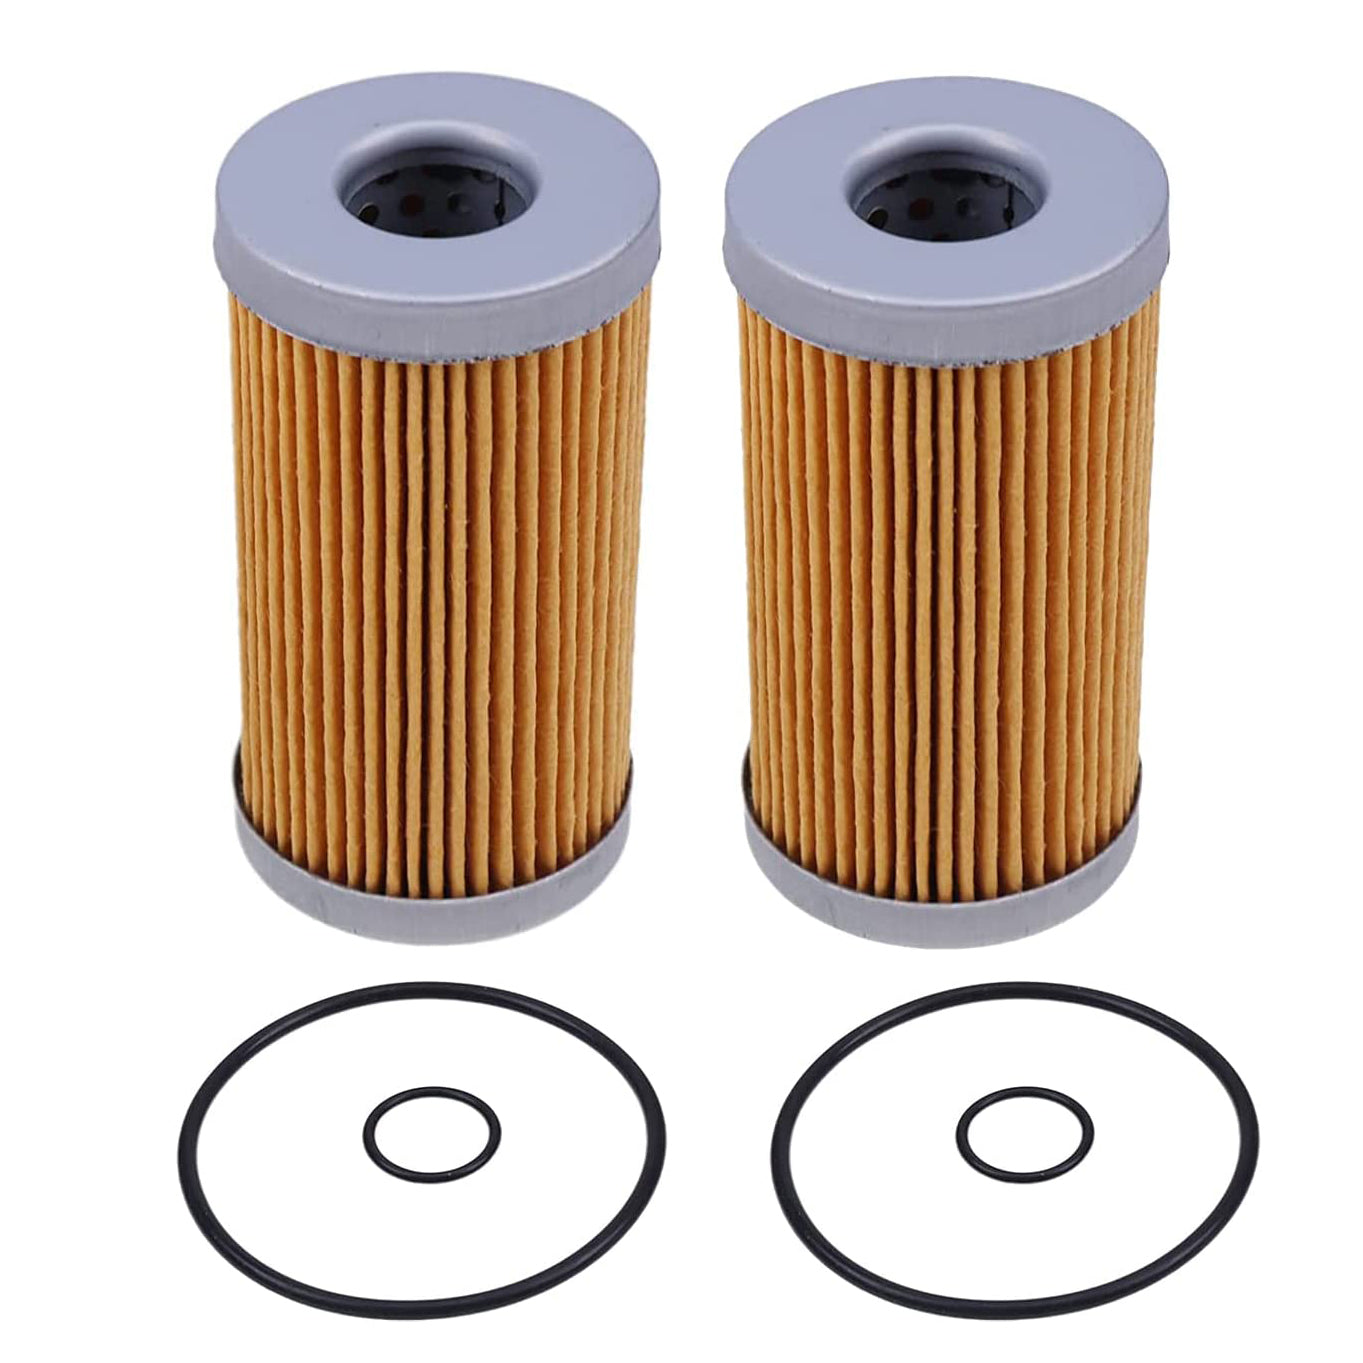 2X New Fuel Filter with O-ring Compatible with Mitsubishi/ SATOH MT20 MT1401